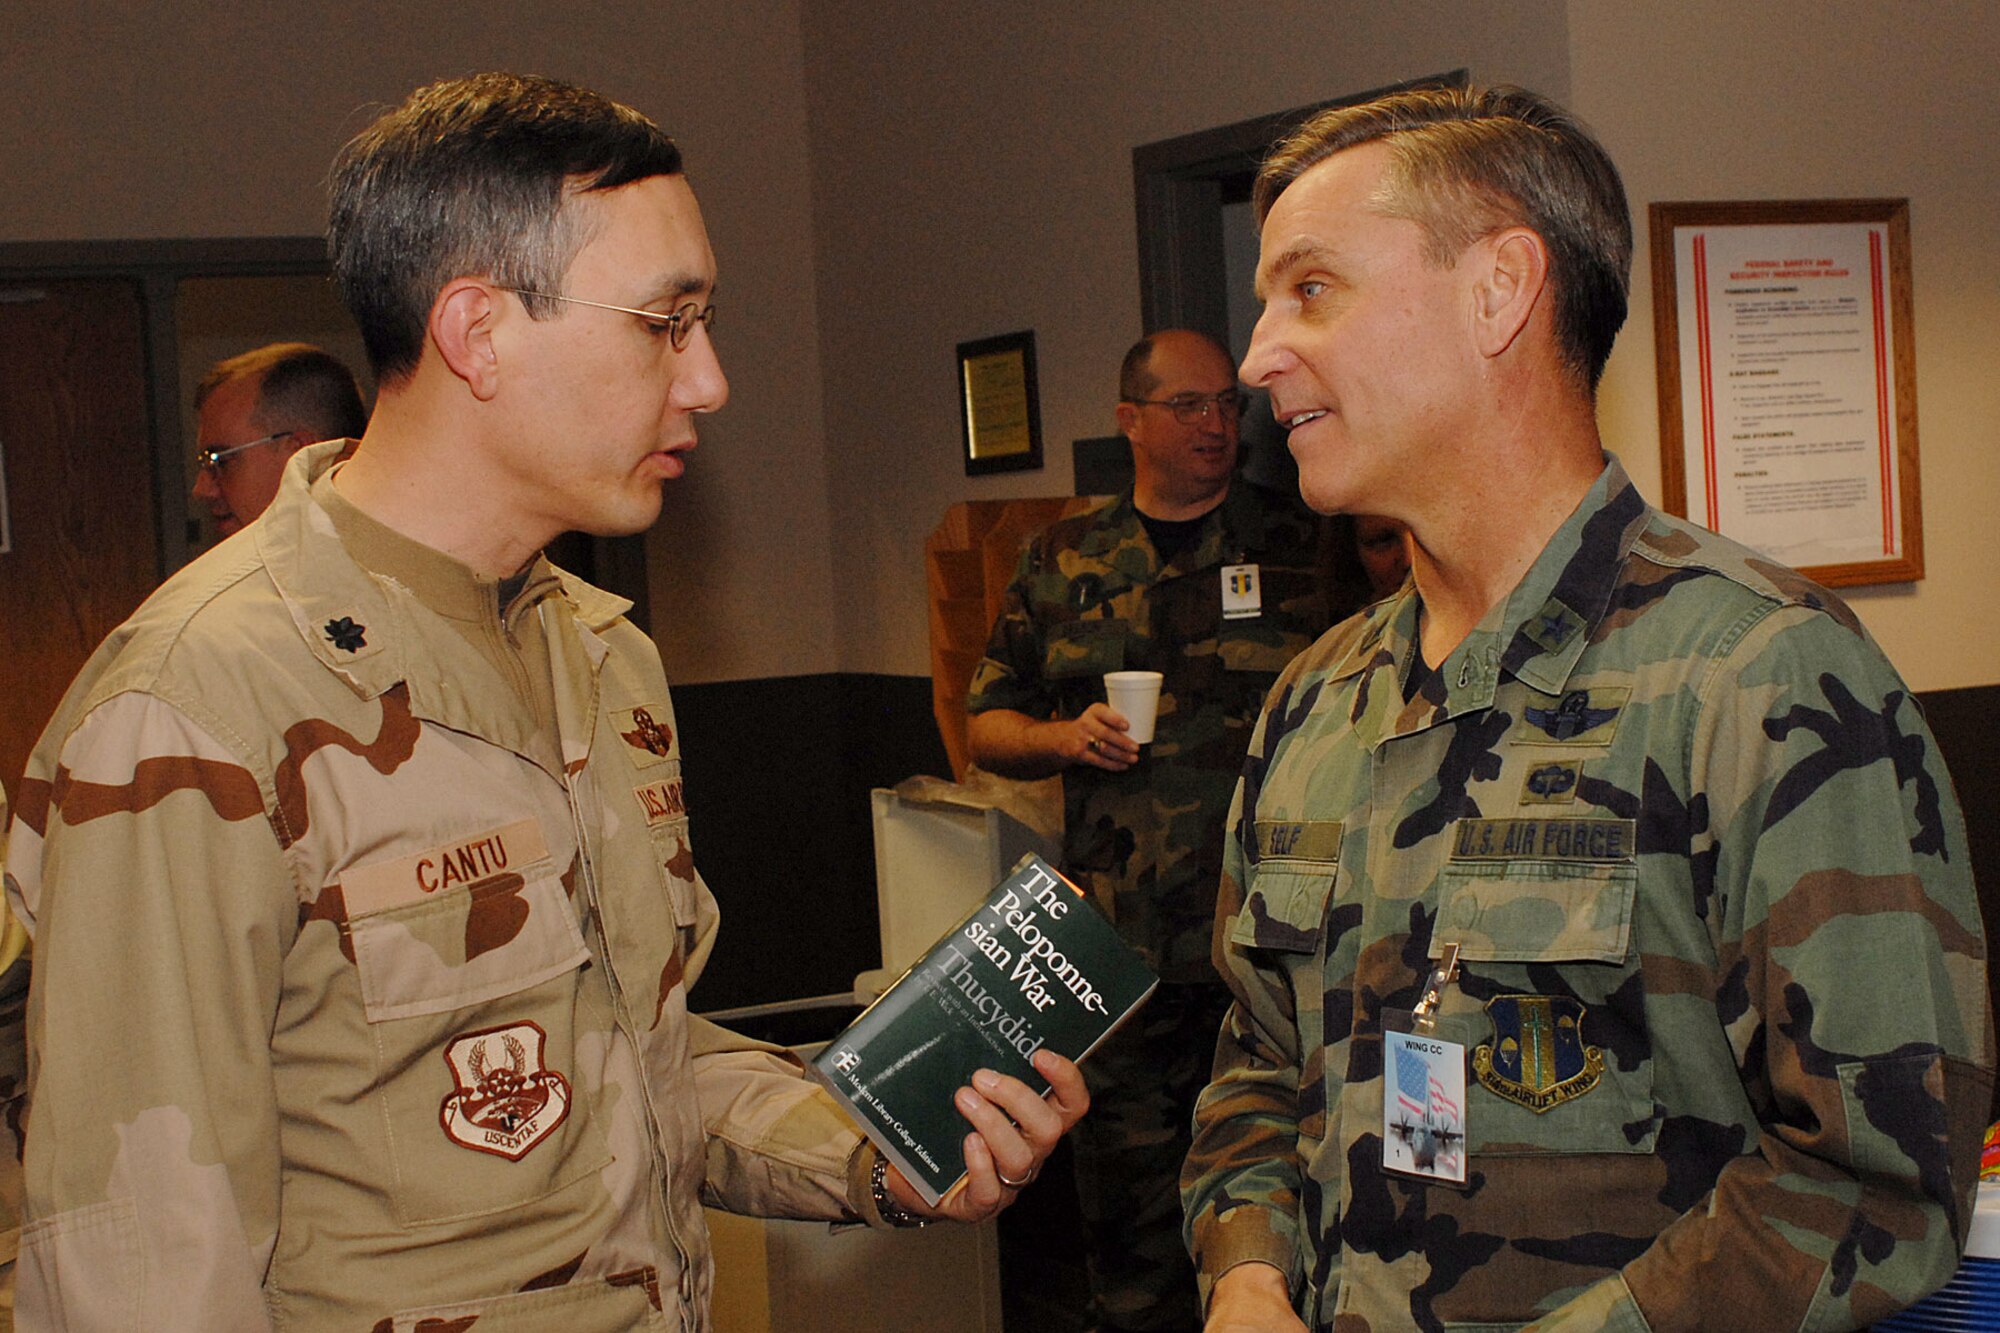 Lt. Col. Christopher Cantu, 463rd Operations Support Squadron director of operations, talks with Brig. Gen. Kip Self, 314th Airlift Wing commander, while waiting for his departure from Little Rock Air Force Base Jan. 21. (Photo by Airman 1st Class Nathan Allen)